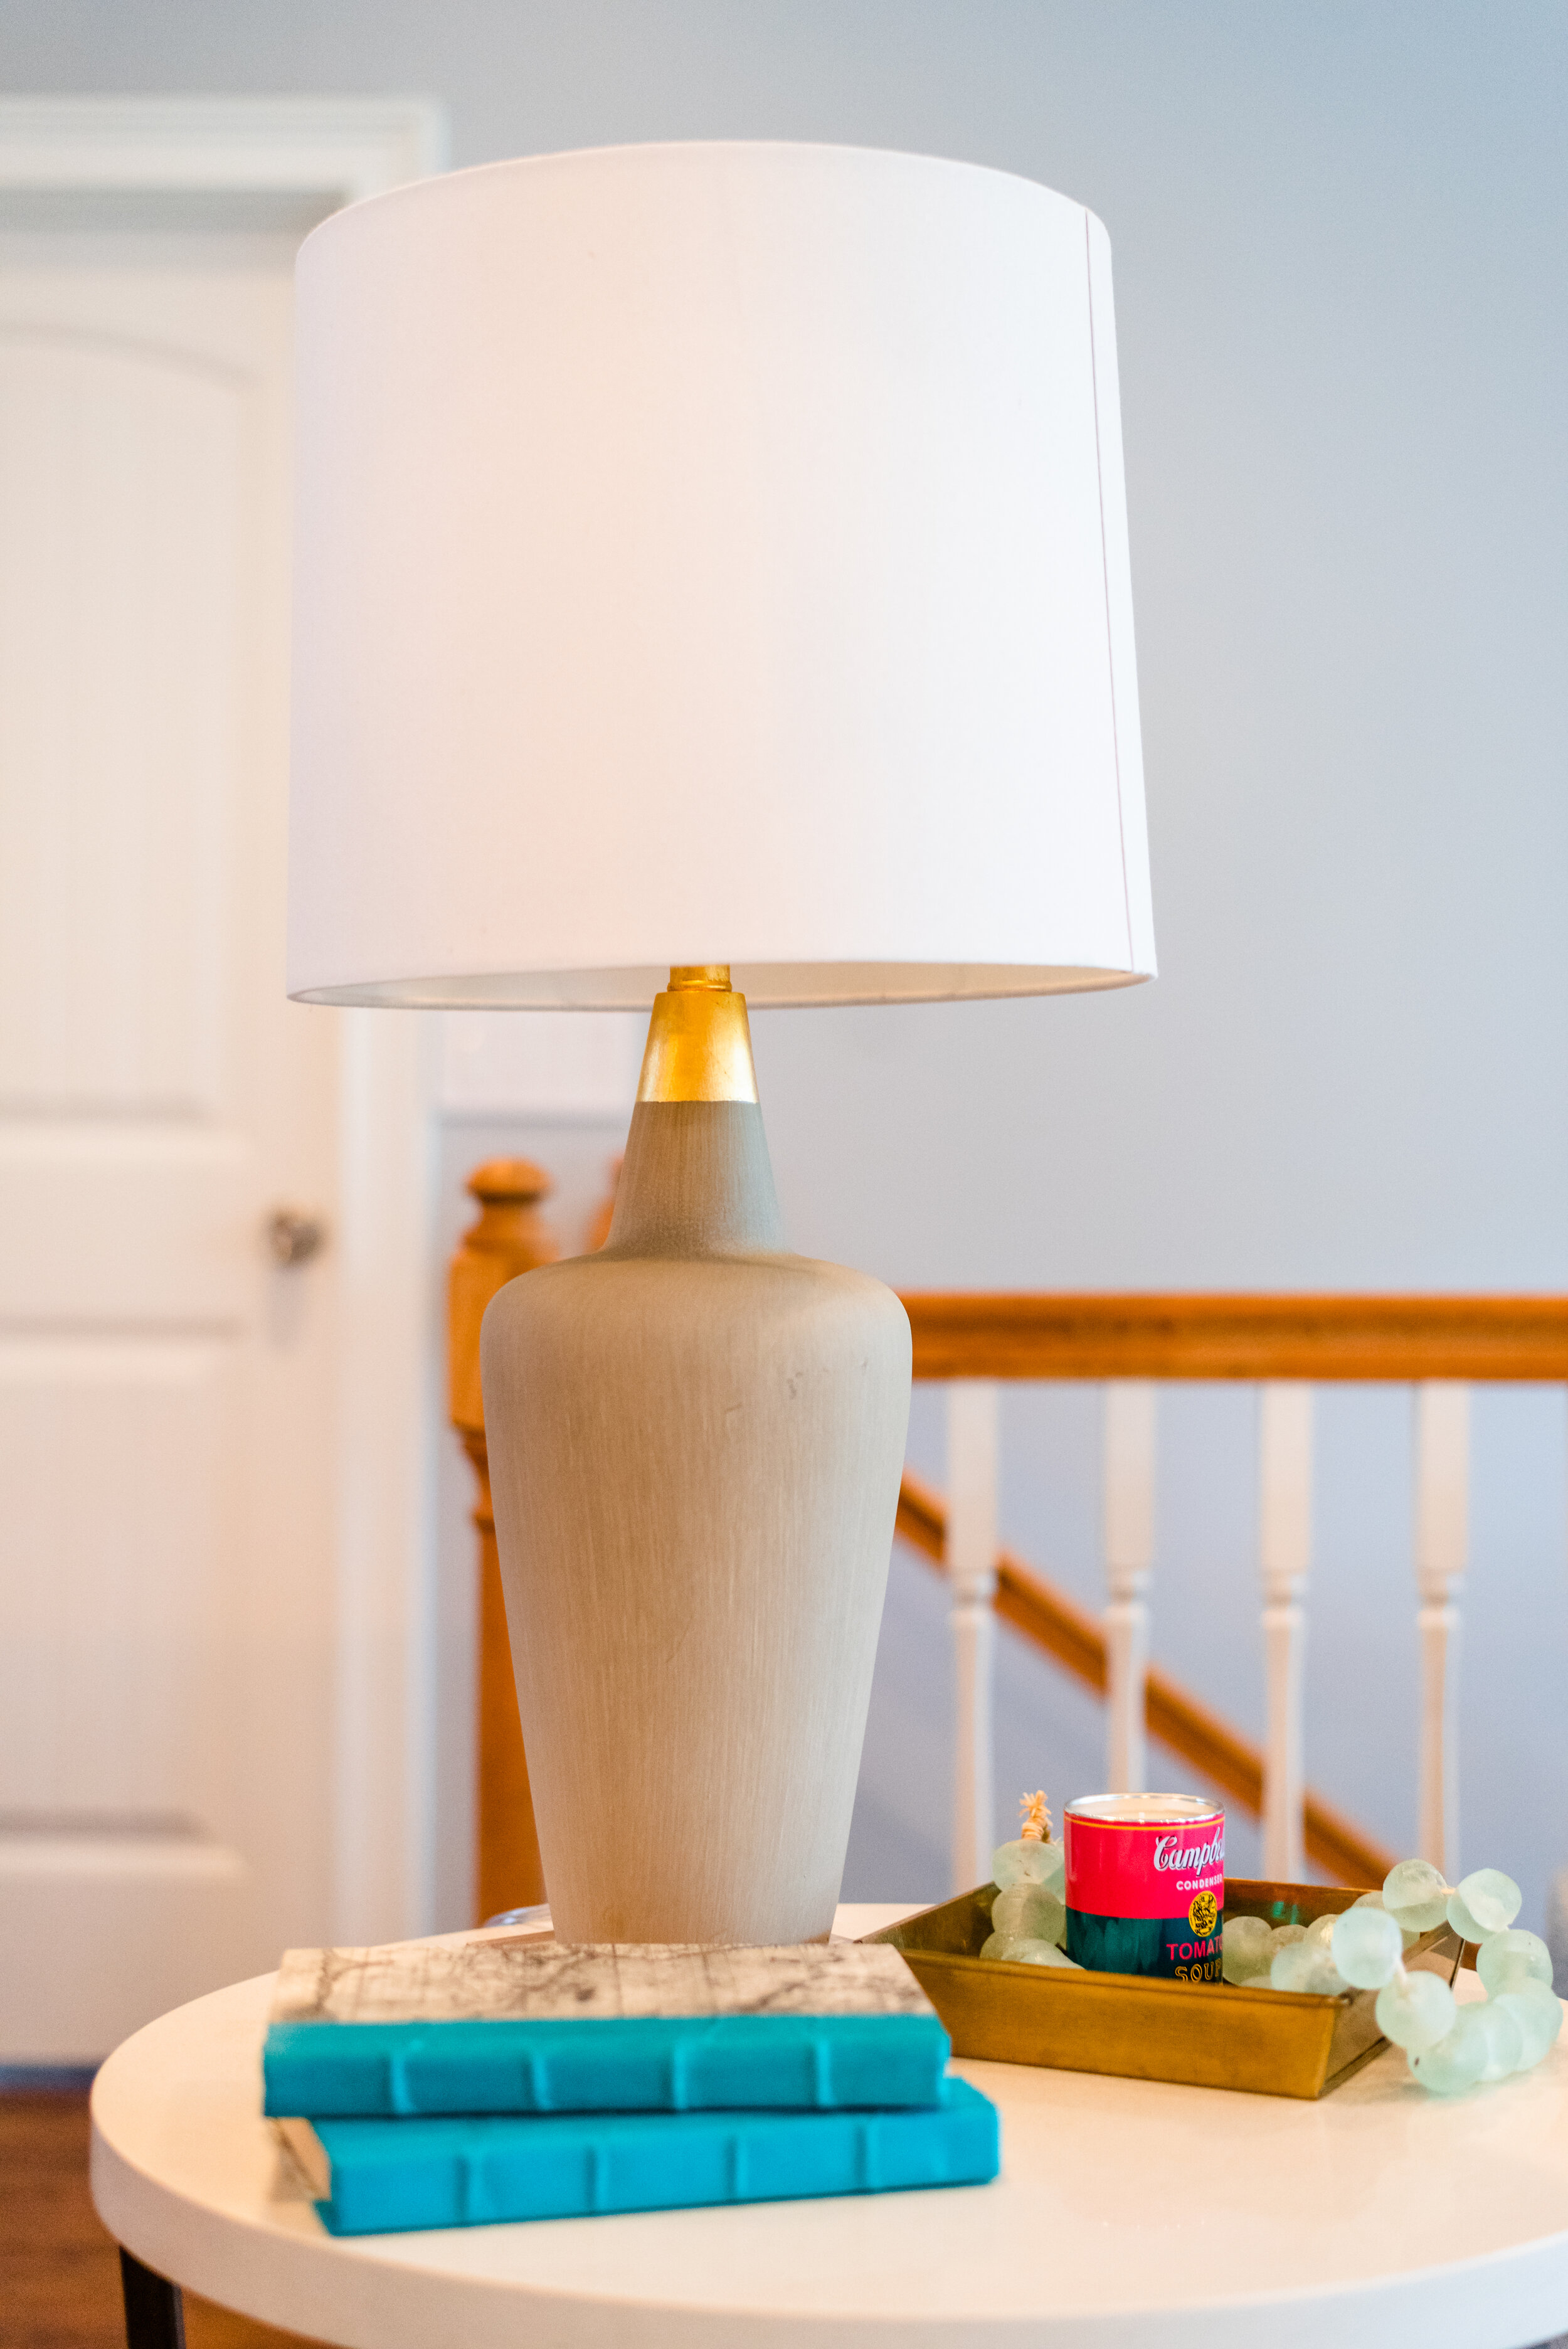 Dwell-Chic-Colorful-Living-Room-Styled-Lamp-And-Table.jpg